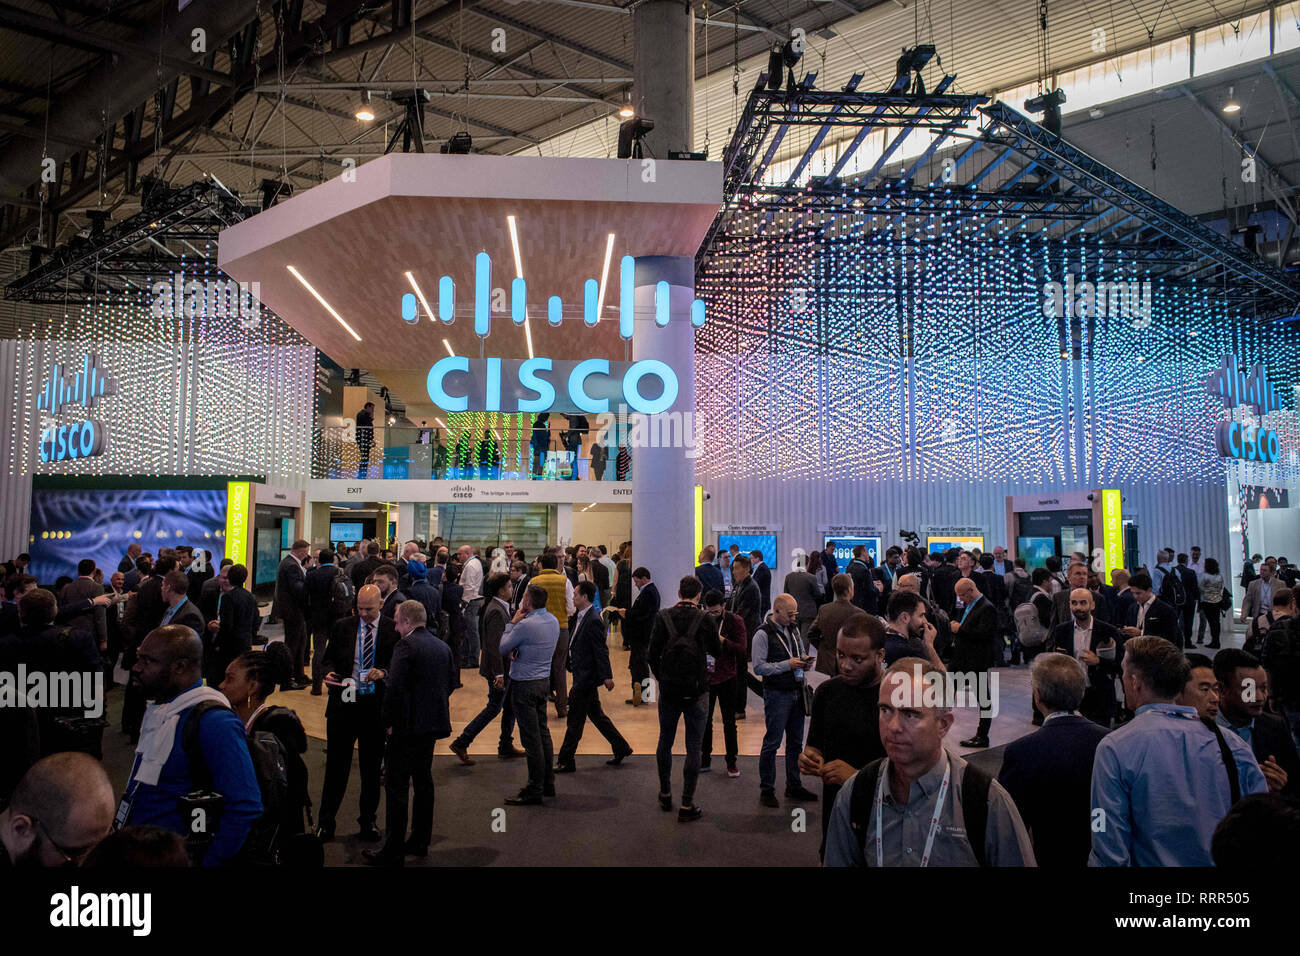 Barcelona, Catalonia, Spain. 26th Feb, 2019. CISCO pavilion during the GSMA Mobile World Congress 2019 in Barcelona, the world's most important event on mobile devices communications bringing together the leading companies and the latest developments in the sector. Credit: Jordi Boixareu/ZUMA Wire/Alamy Live News Stock Photo